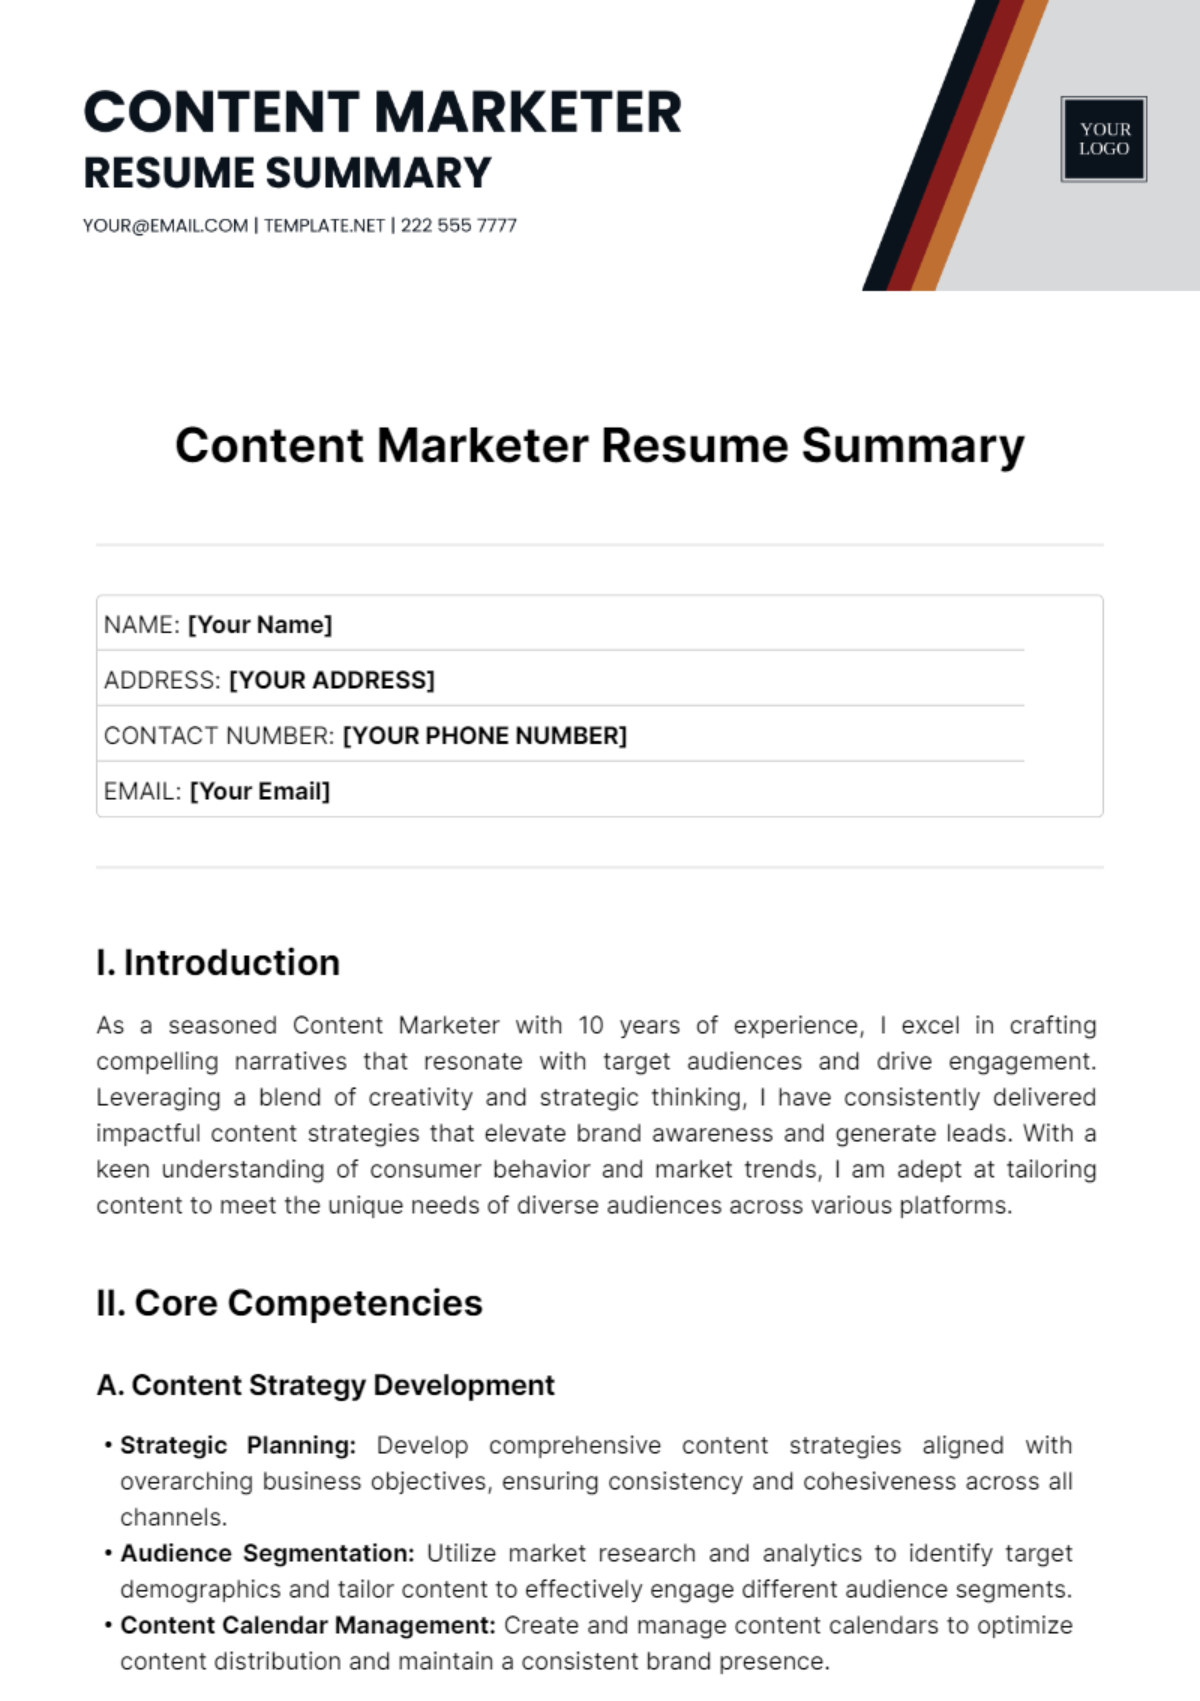 Content Marketer Resume Summary Template